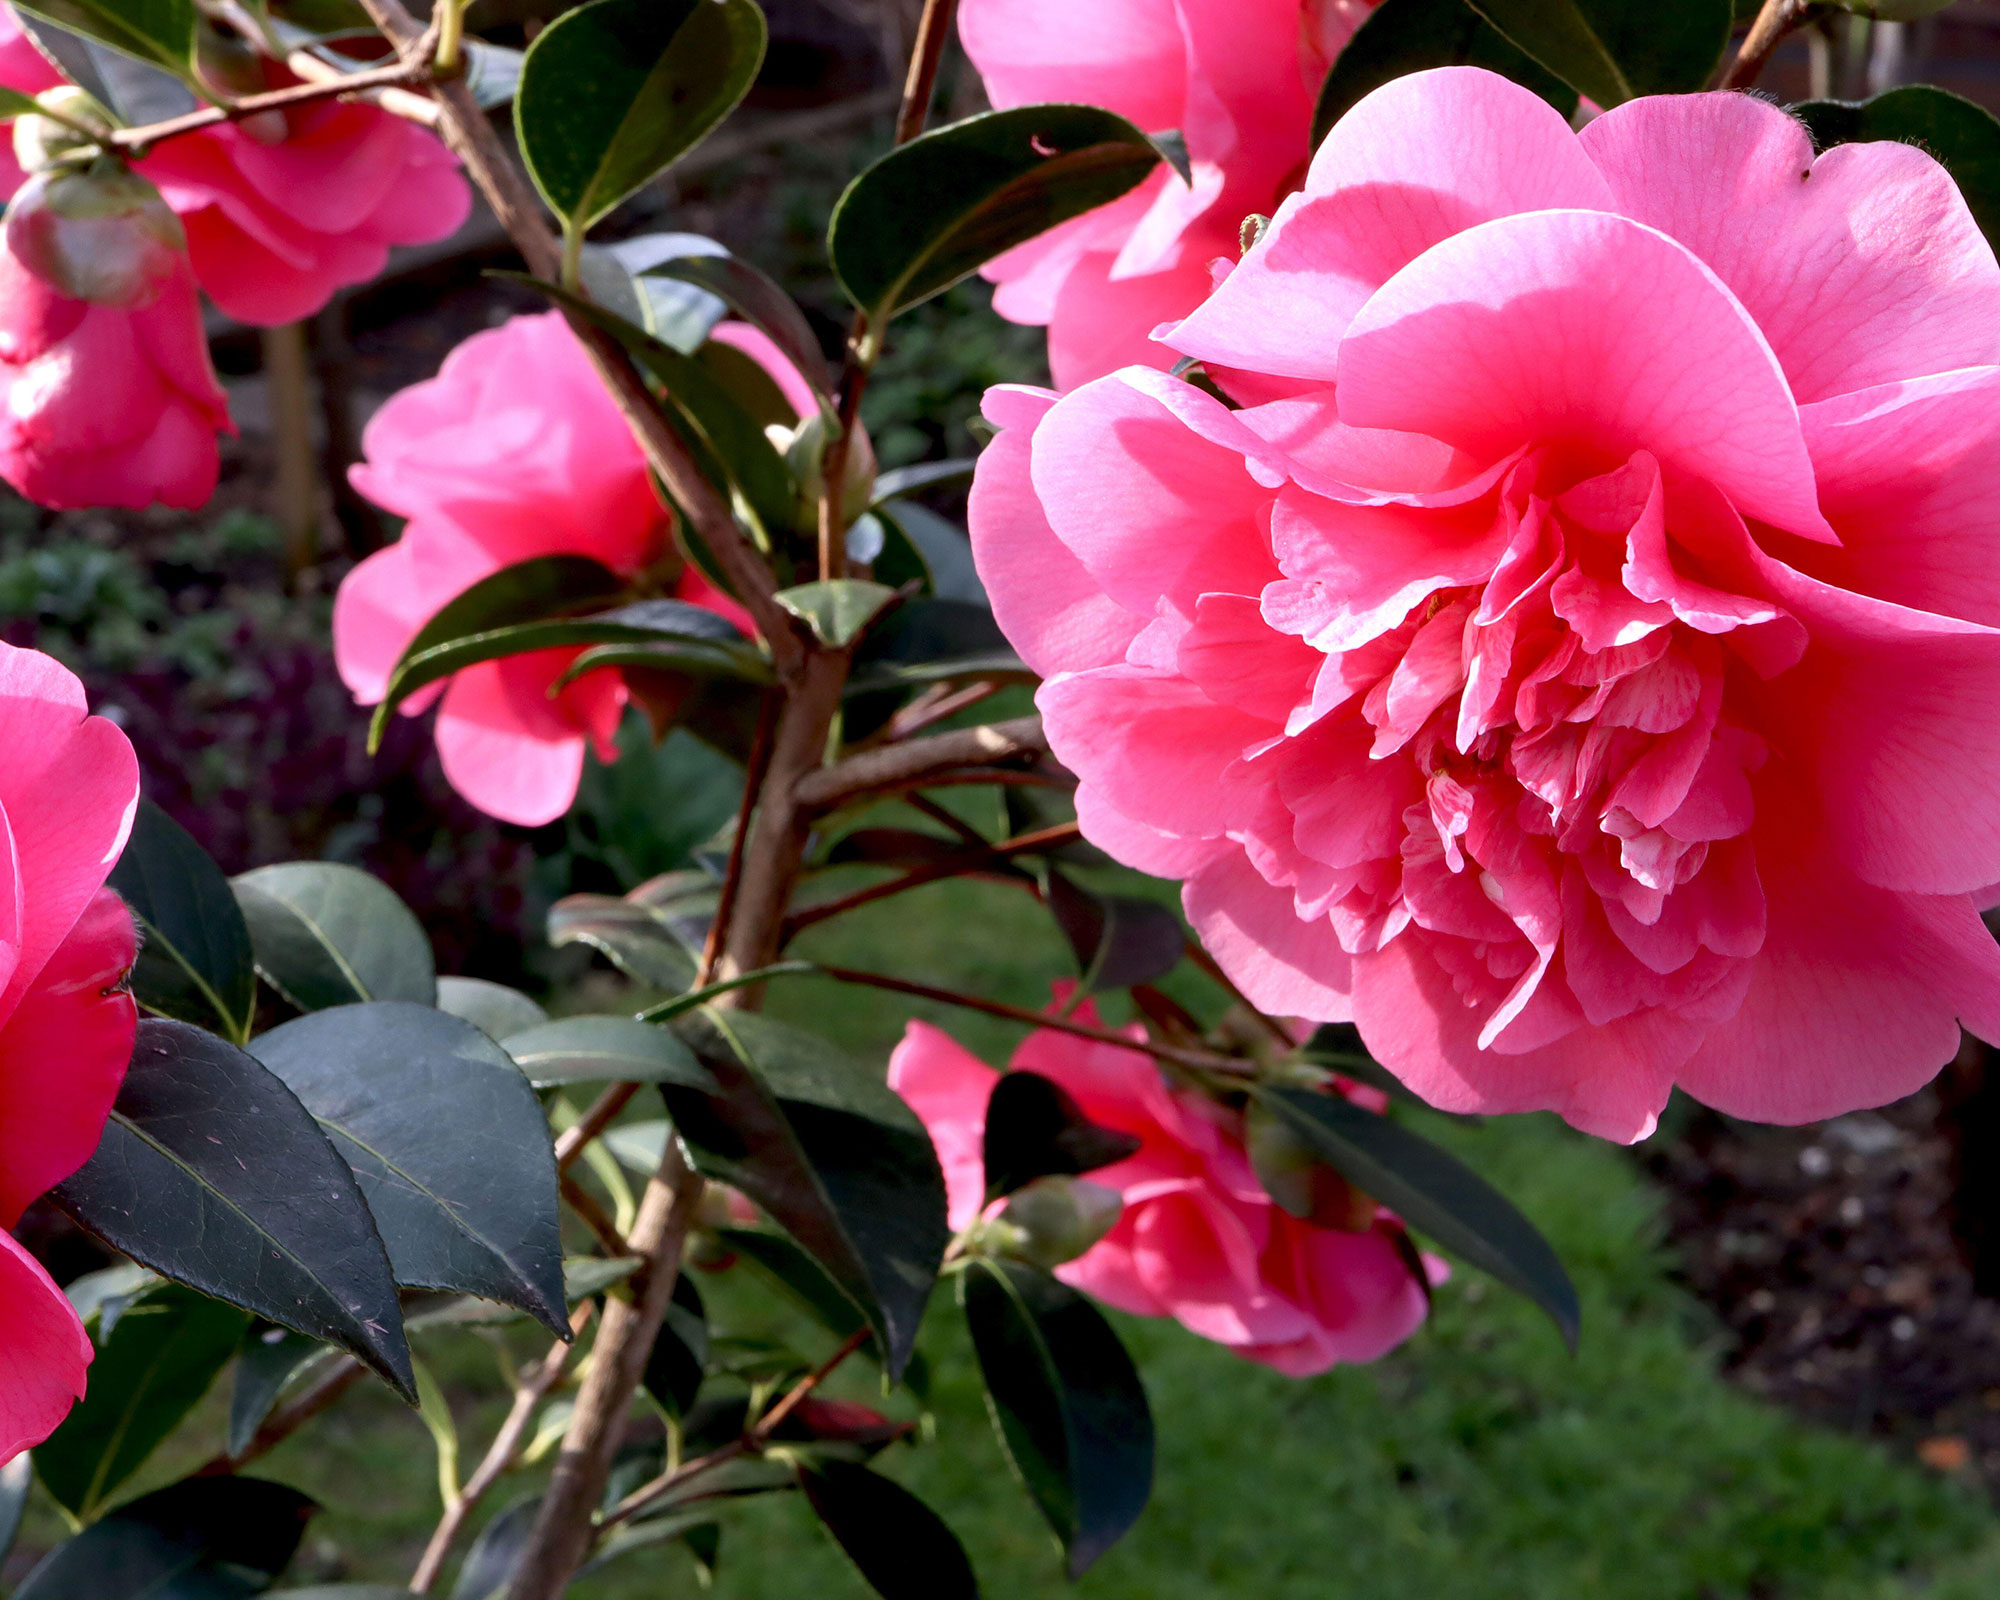 Shade and soil are key to caring for your camellias